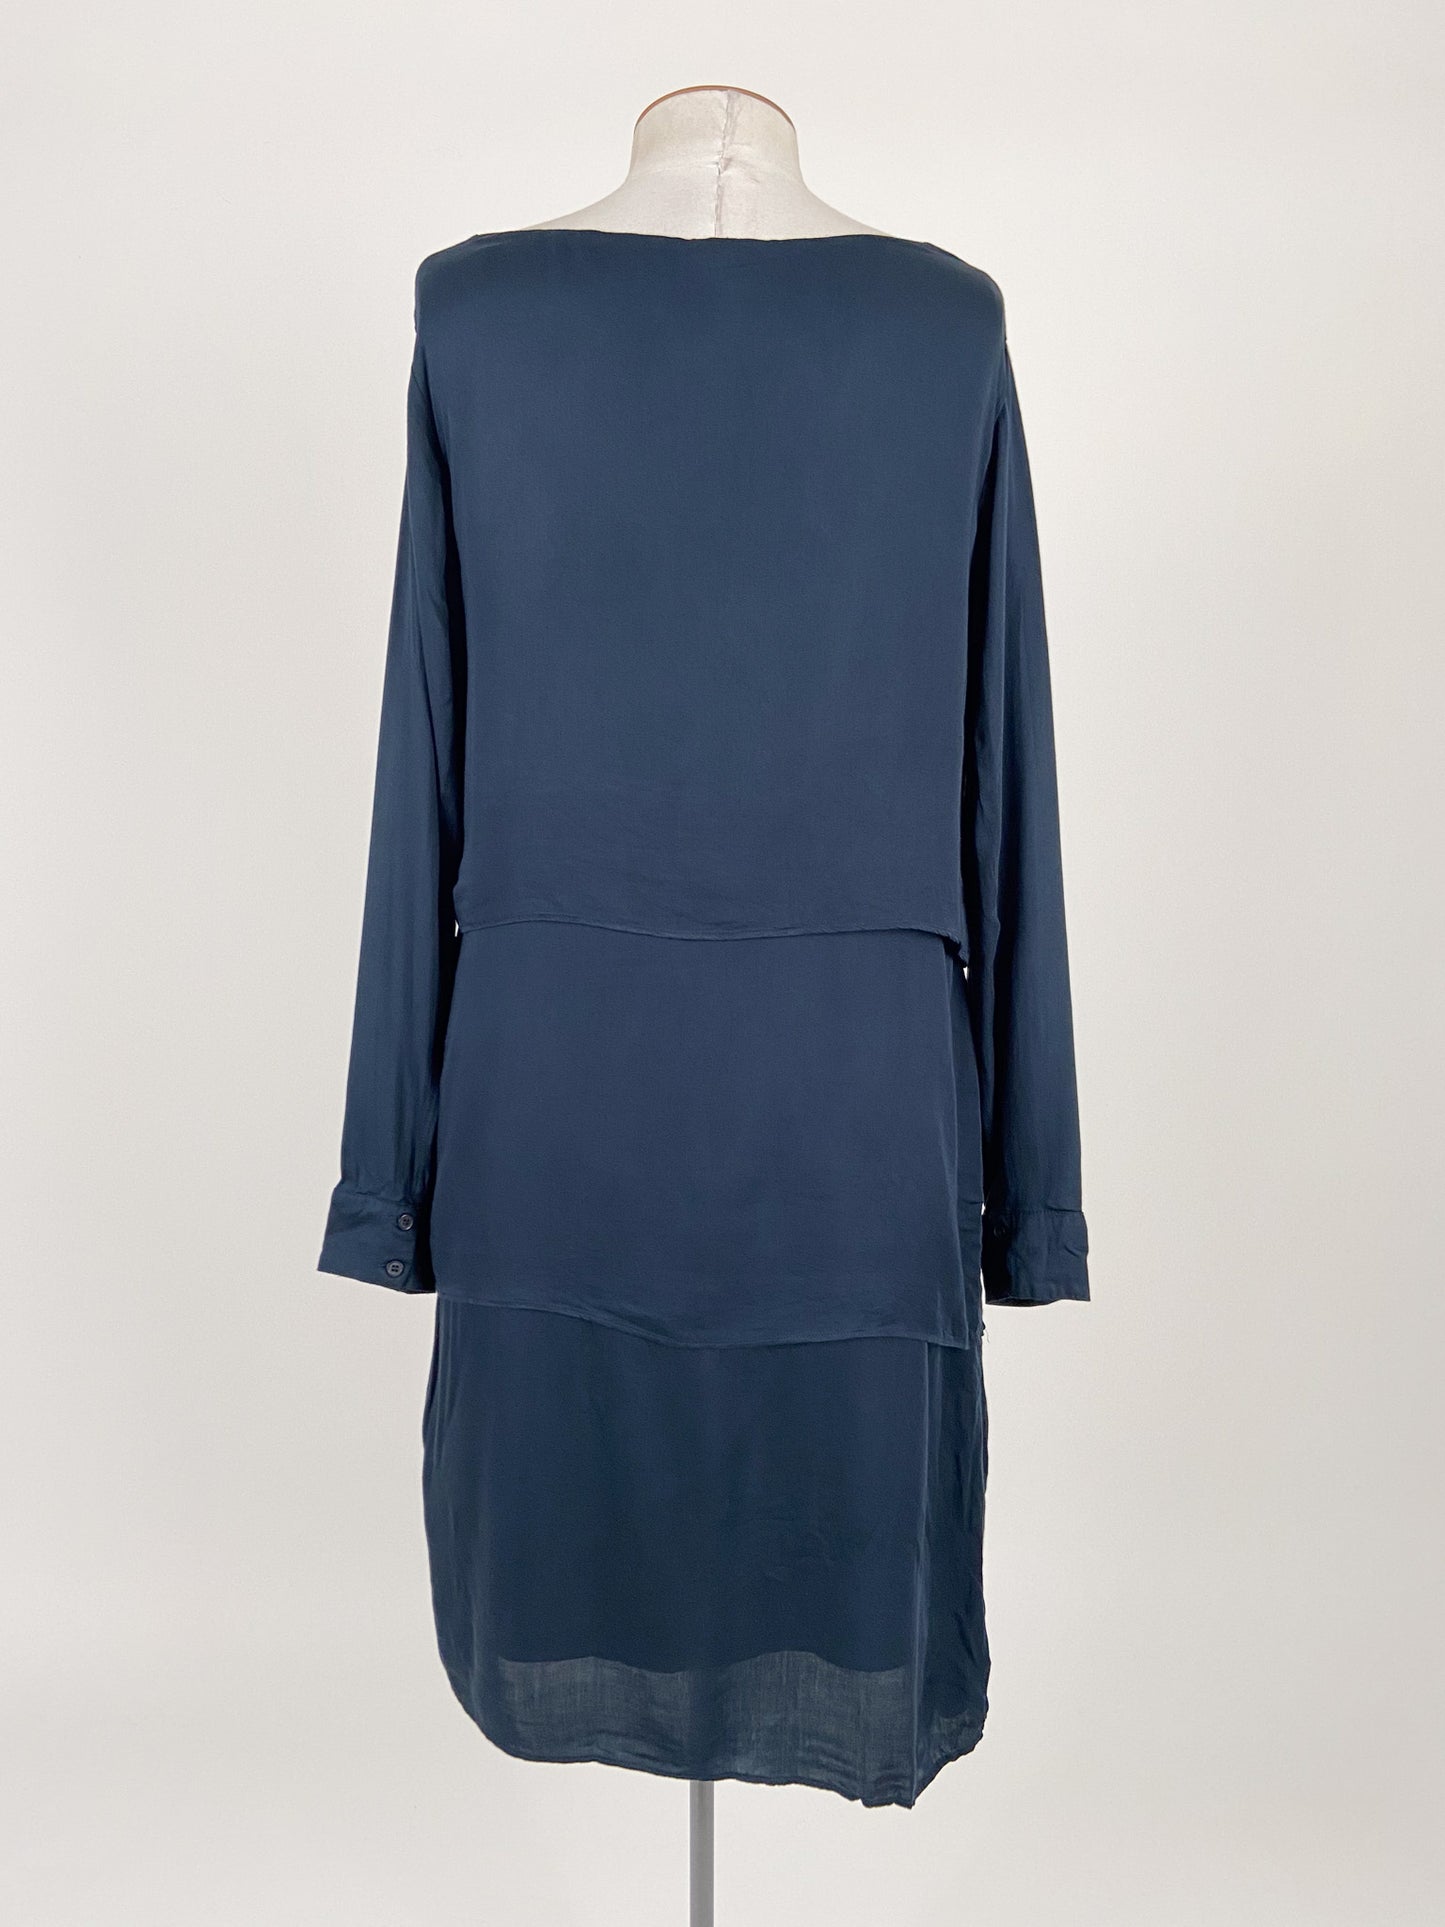 PQ The Label | Navy Casual Dress | Size M